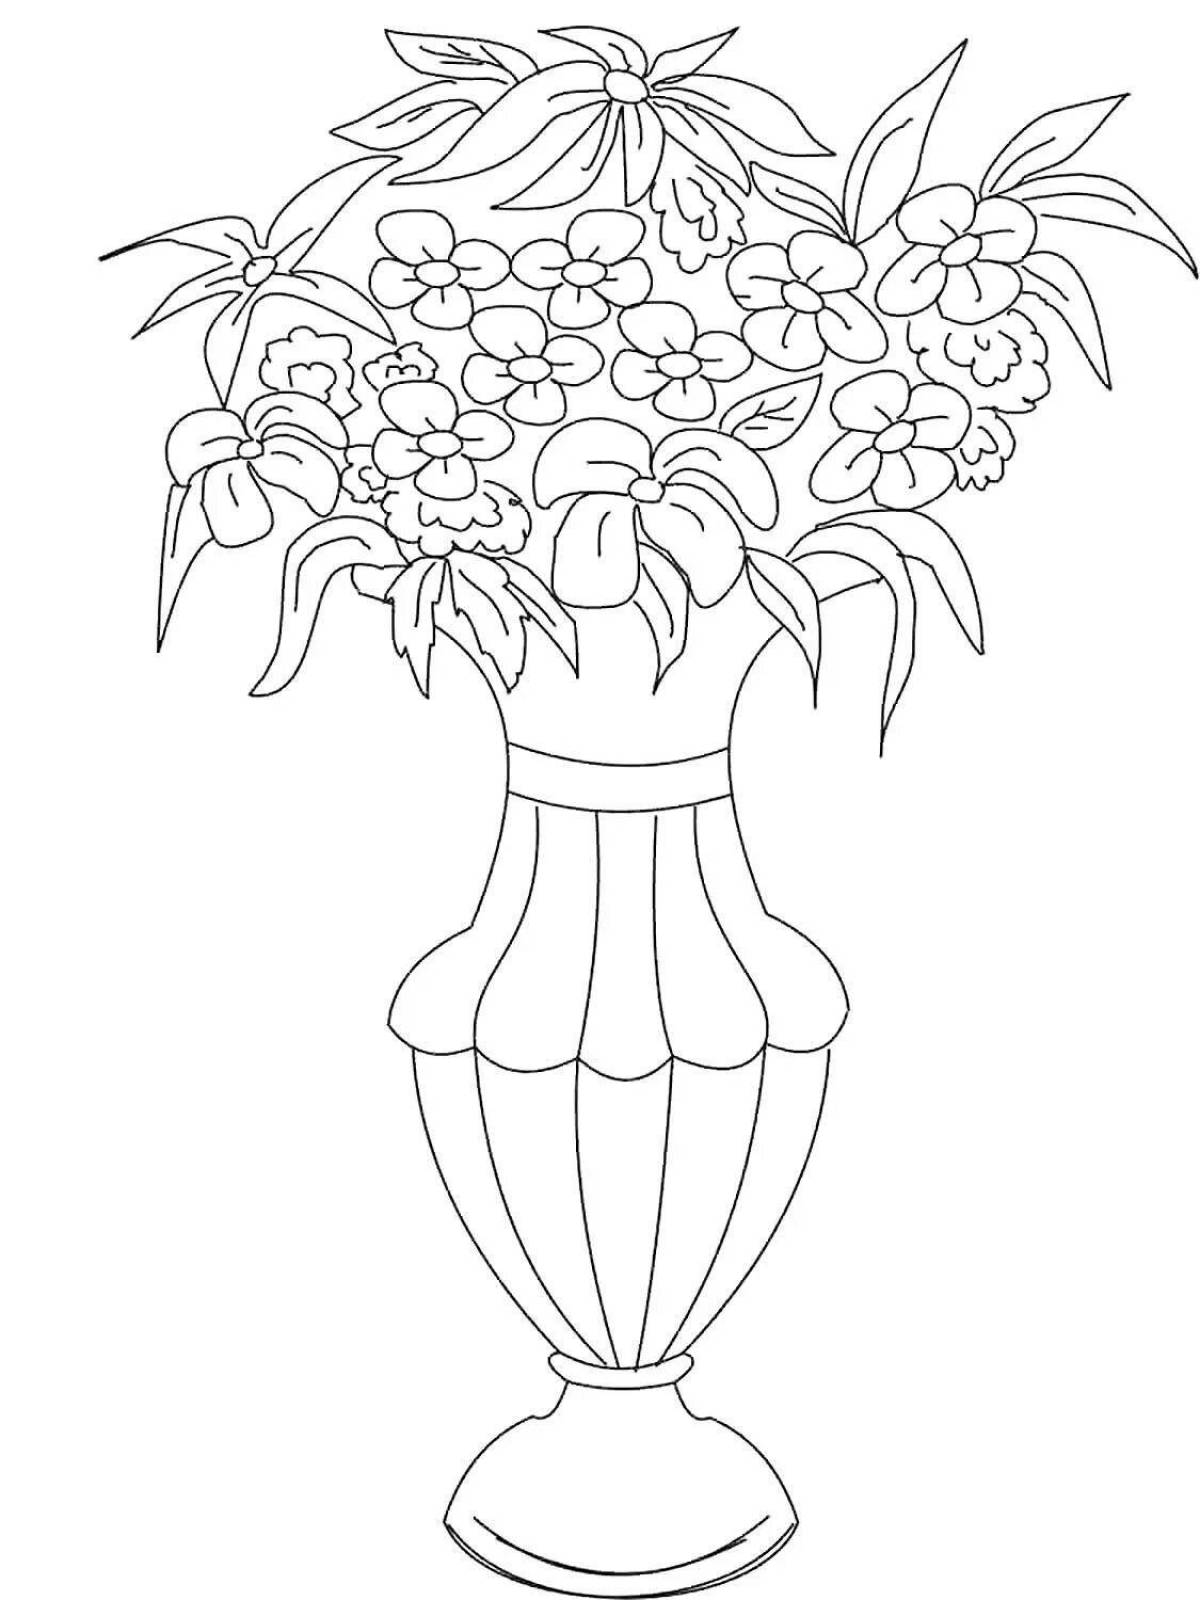 Bright coloring flower in a vase